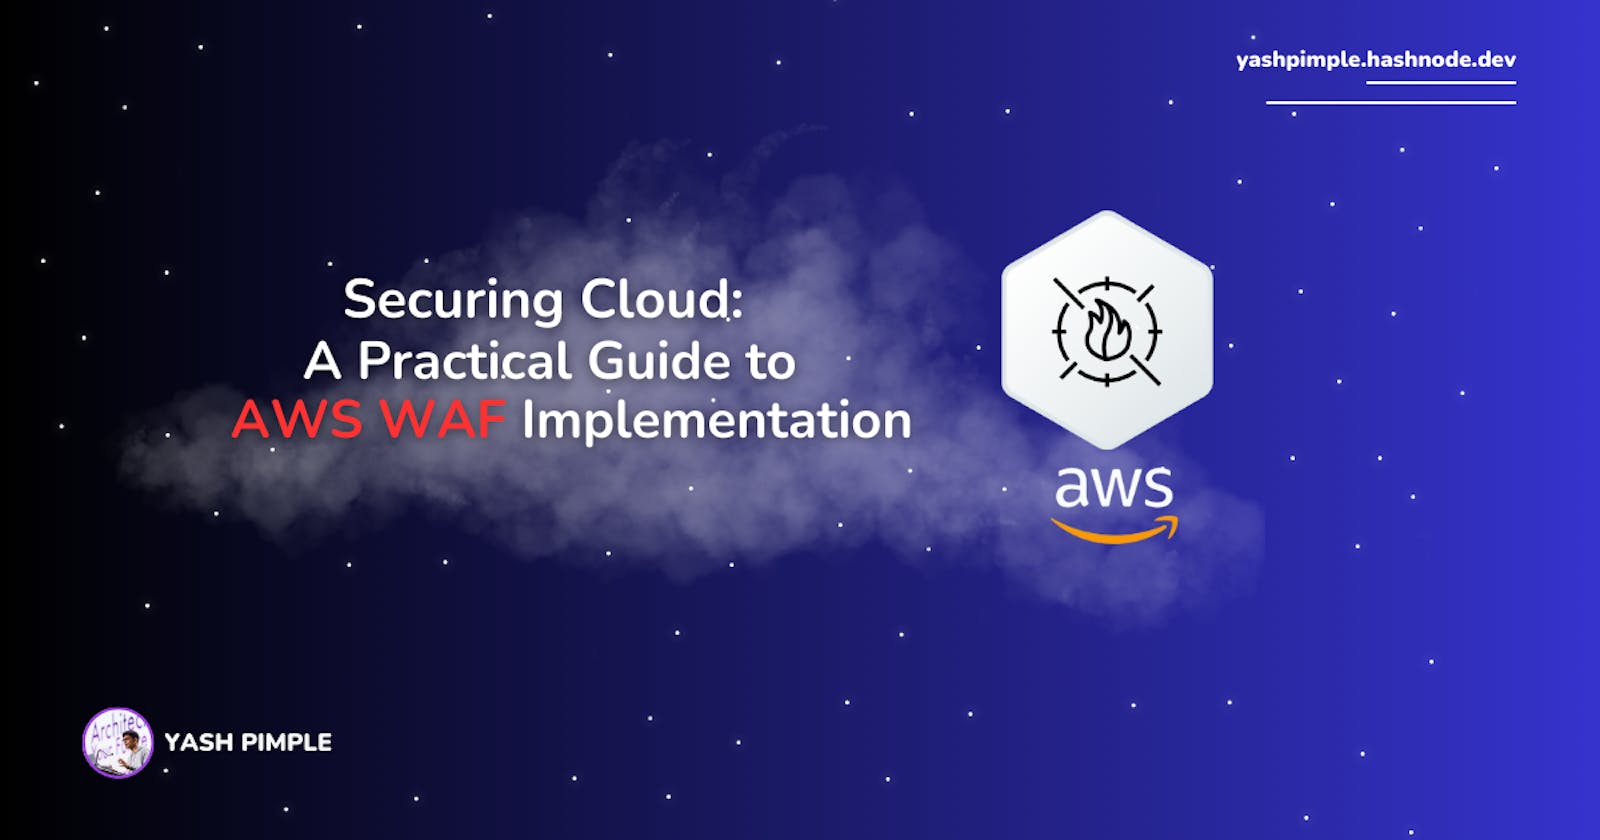 Securing the Cloud: A Practical Guide to AWS WAF Implementation